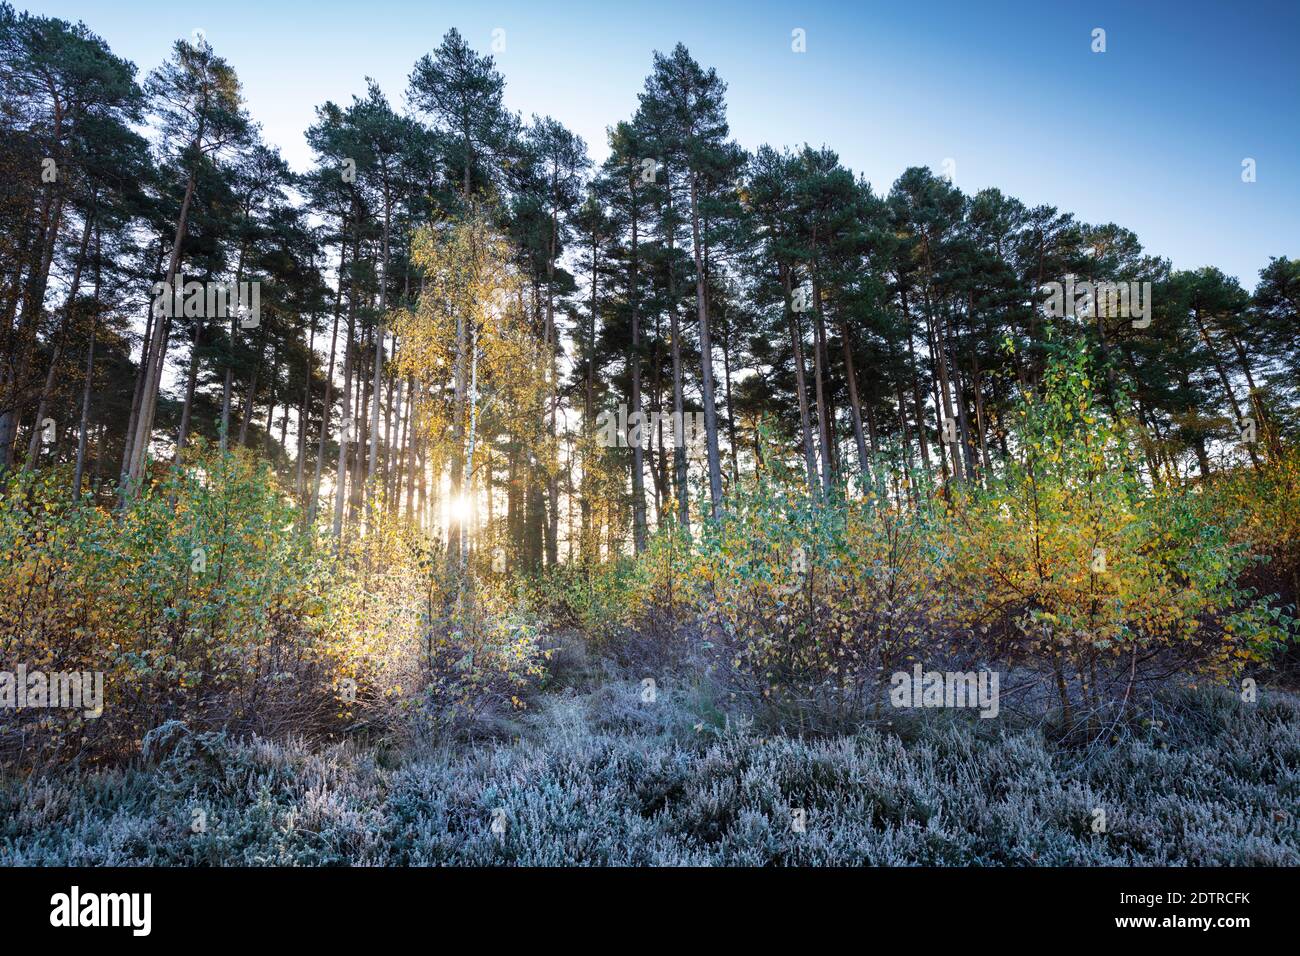 Scots Pine and Silver Birch trees with autumn leaves in backlit sunlight with morning frost, Newtown Common, Burghclere, Hampshire, England, UK Stock Photo